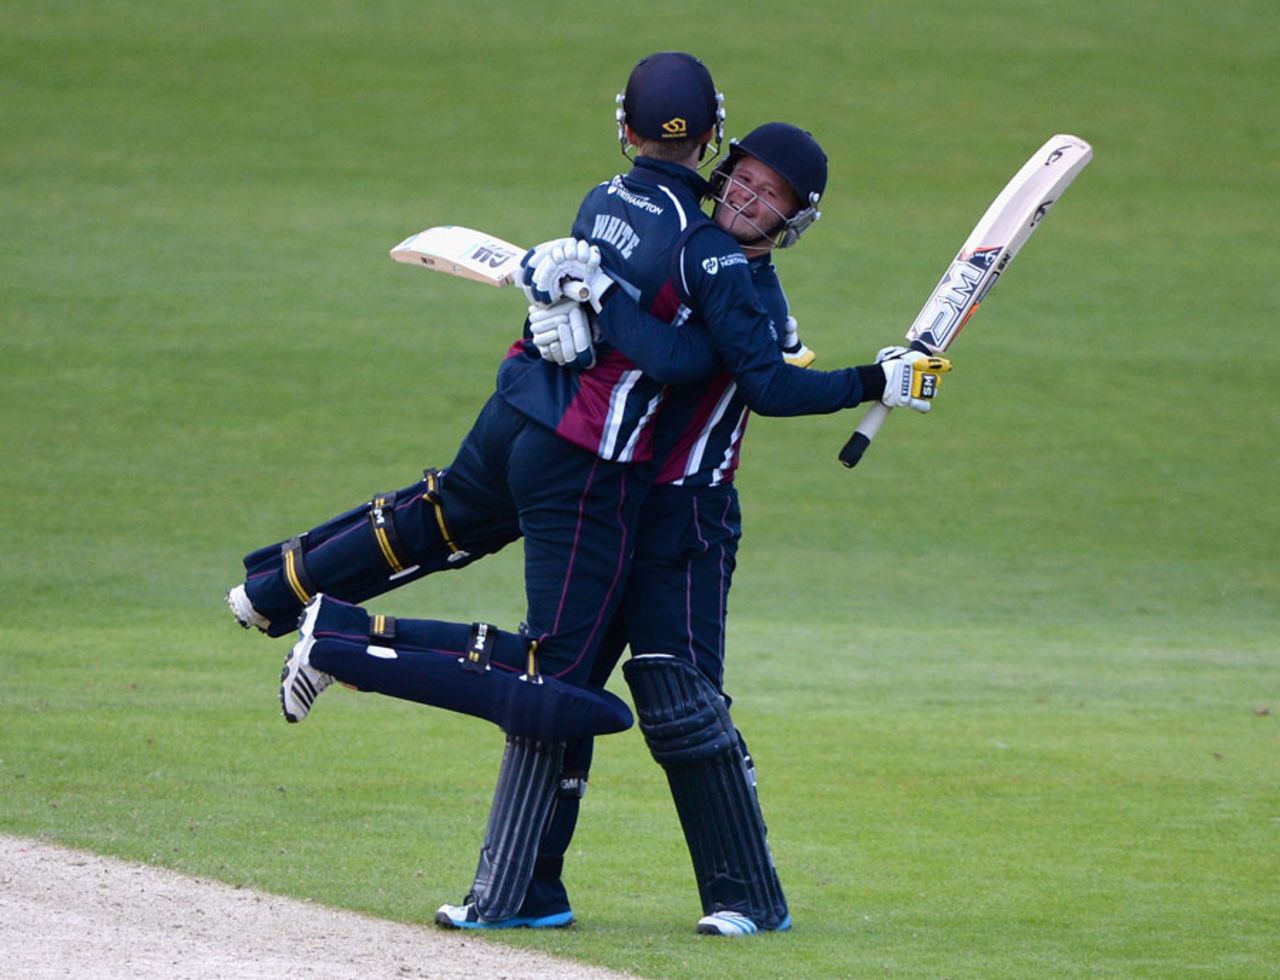 Ben Duckett and Graeme White celebrate sealing victory, Yorkshire v Northamptonshire, NatWest T20 Blast, North Division, Headingley, May 16, 2014